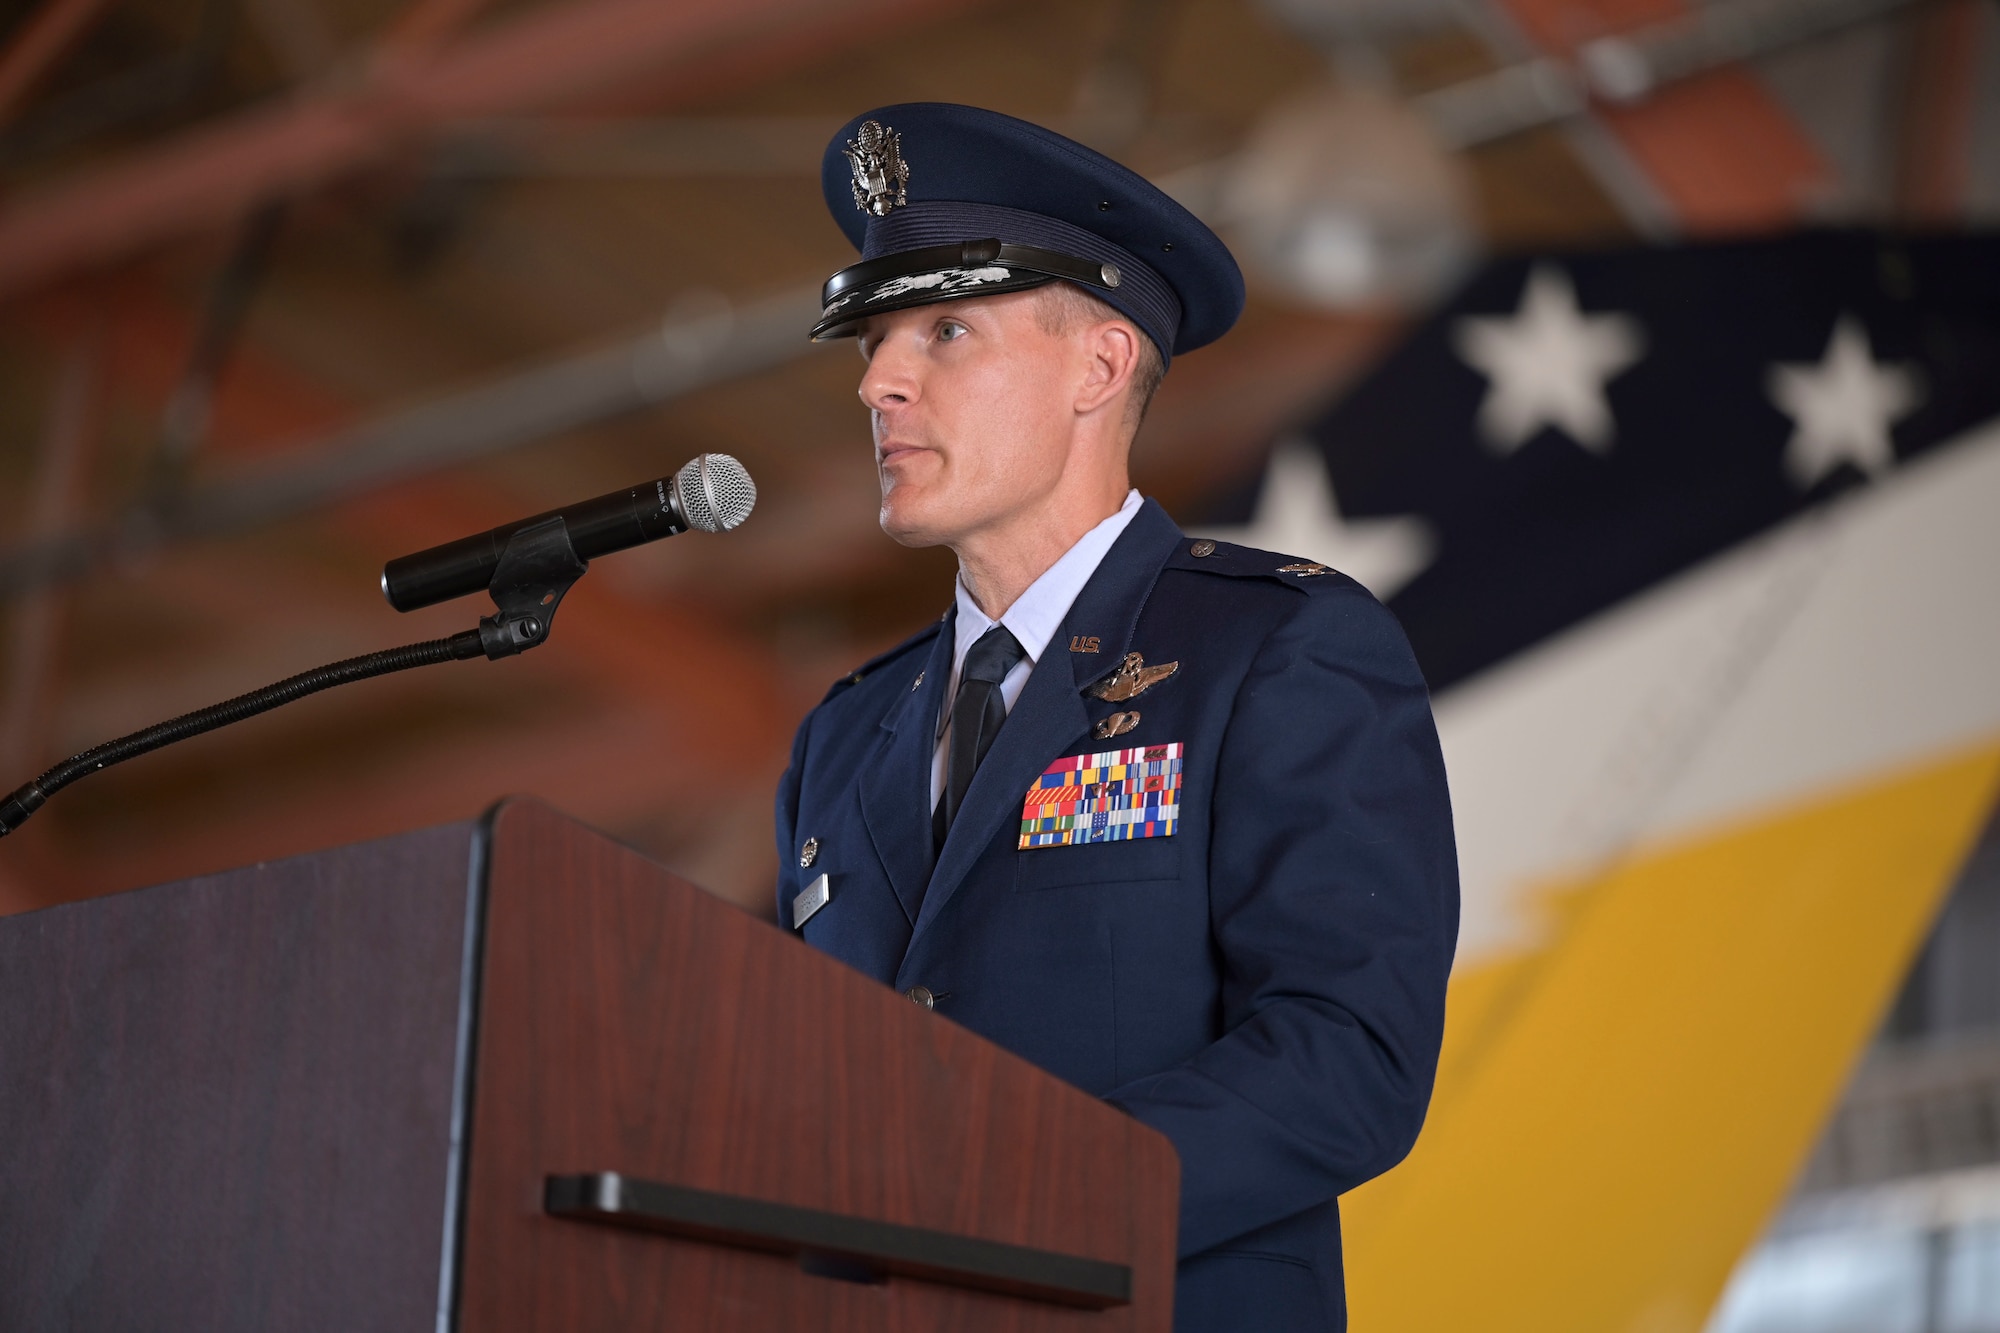 Col. Justin B. Spears, 49th Wing commander, gives his first speech to the Fightin’ 49ers during a change of command ceremony, June 17, 2022, on Holloman Air Force Base, New Mexico. Spears was previously the commander of the 14th Operations Group at Columbus Air Force Base, Mississippi, before assuming his new role as the commander of the 49th Wing. (U.S. Air Force photo by Airman 1st Class Antonio Salfran)